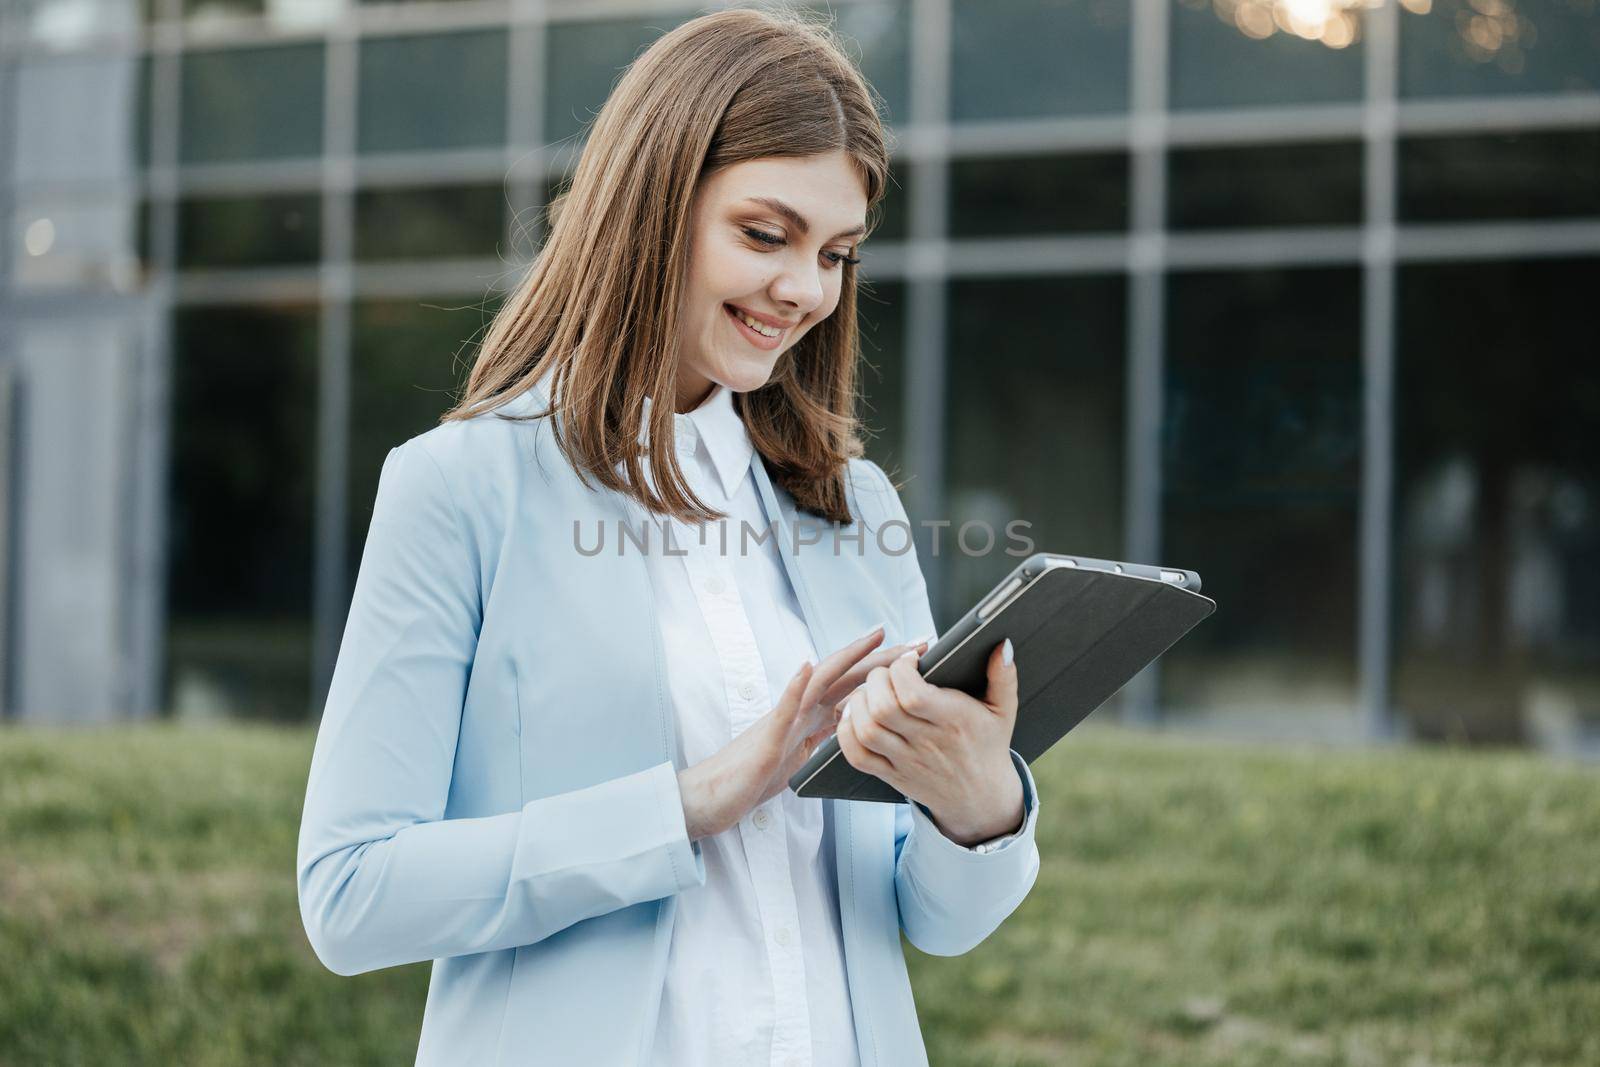 Beautiful young woman engaged in business using tablet computer reading financial news online. European hairstyle. Corporate people by uflypro